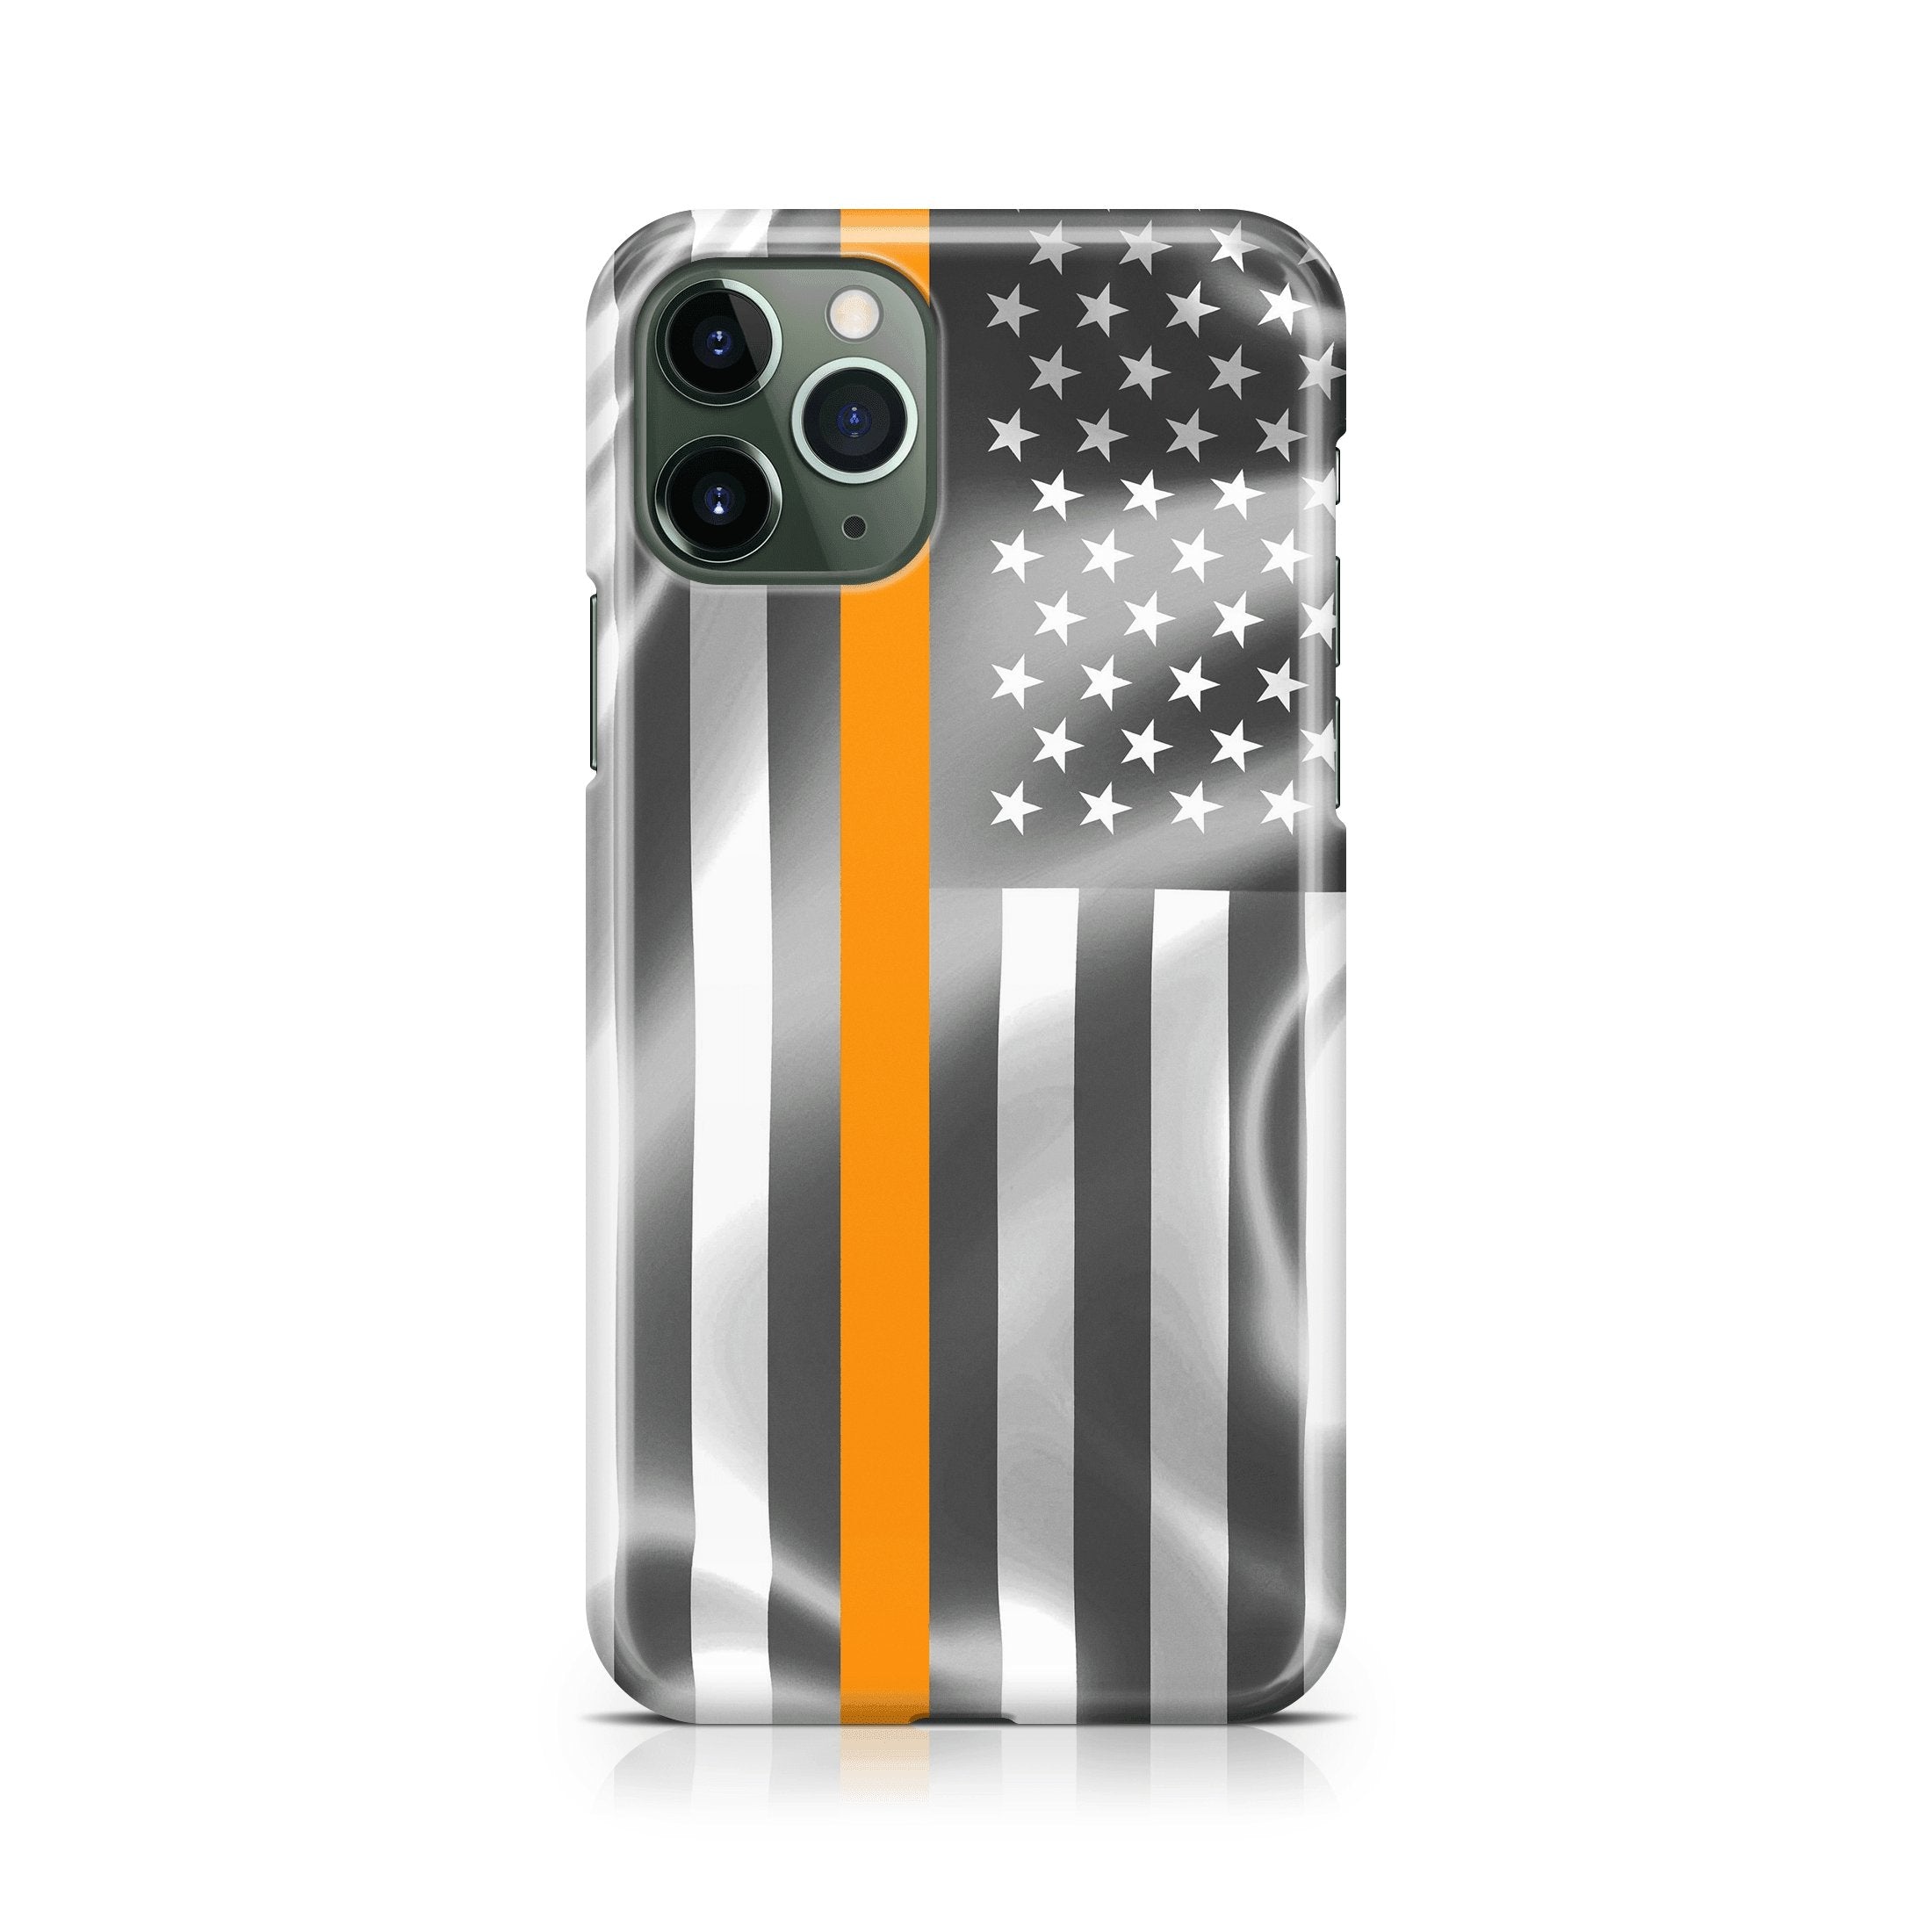 Thin Orange Line - iPhone phone case designs by CaseSwagger